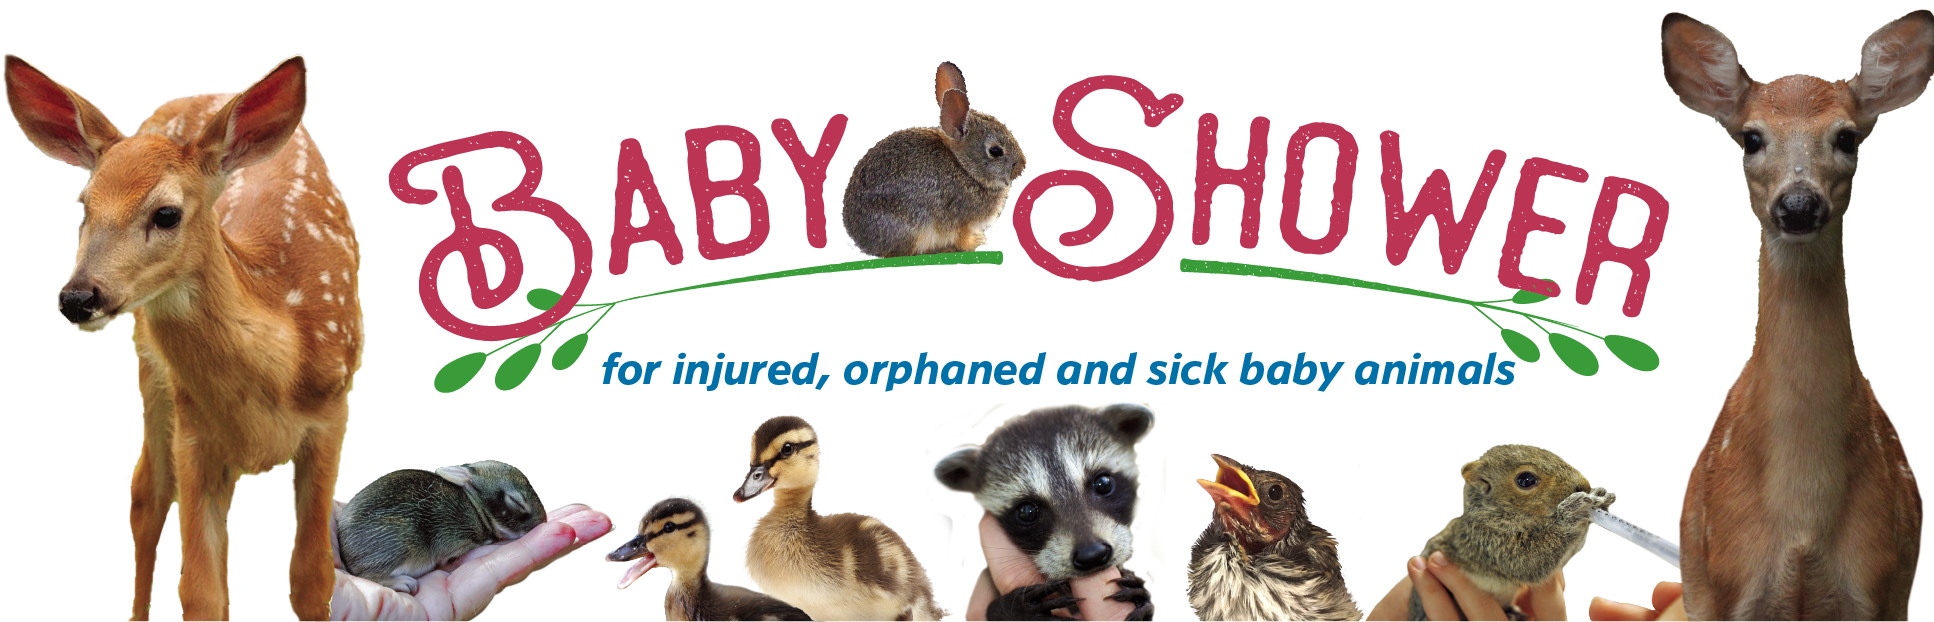 baby shower logo graphic with fawns, baby squirrel, ducklings, a raccoon and other baby animals.